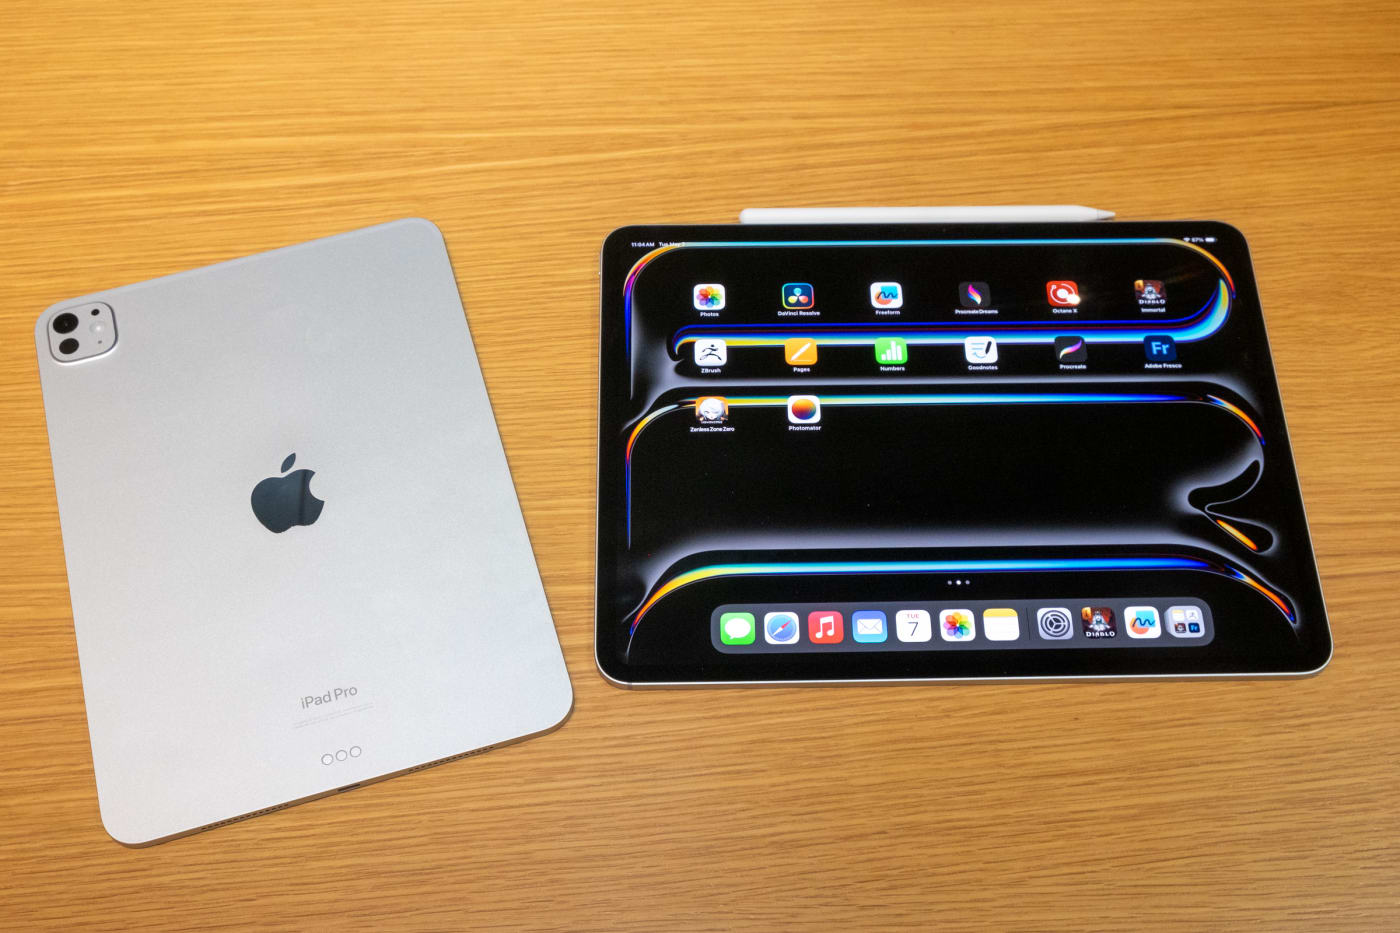 Hands-on with the new iPad Pro M4: Absurdly thin and light, but the screen steals the show